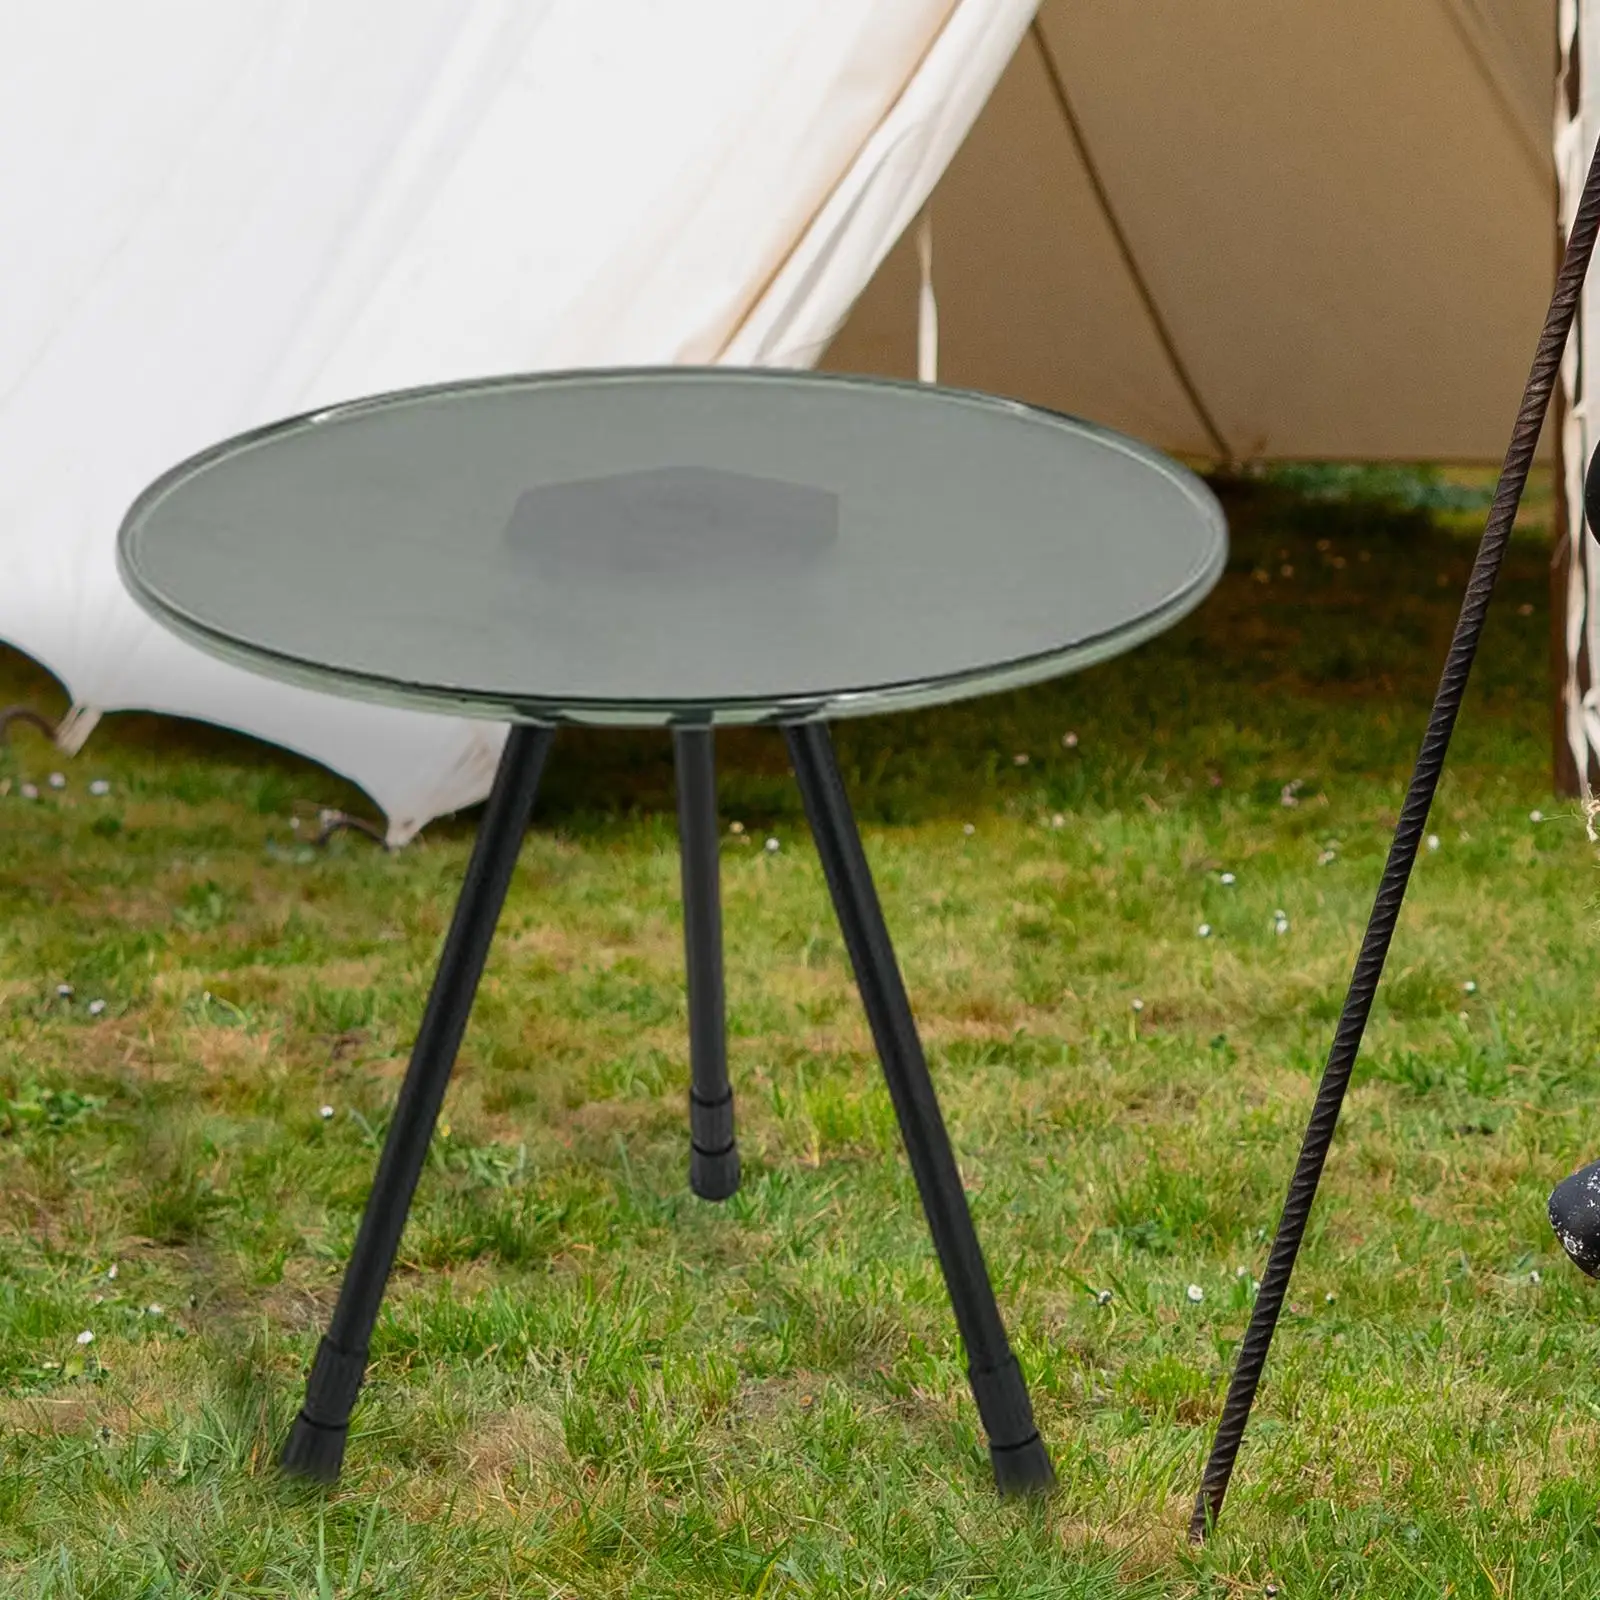 Three Legged Round Table Foldable Dining Desk for Hiking Fishing